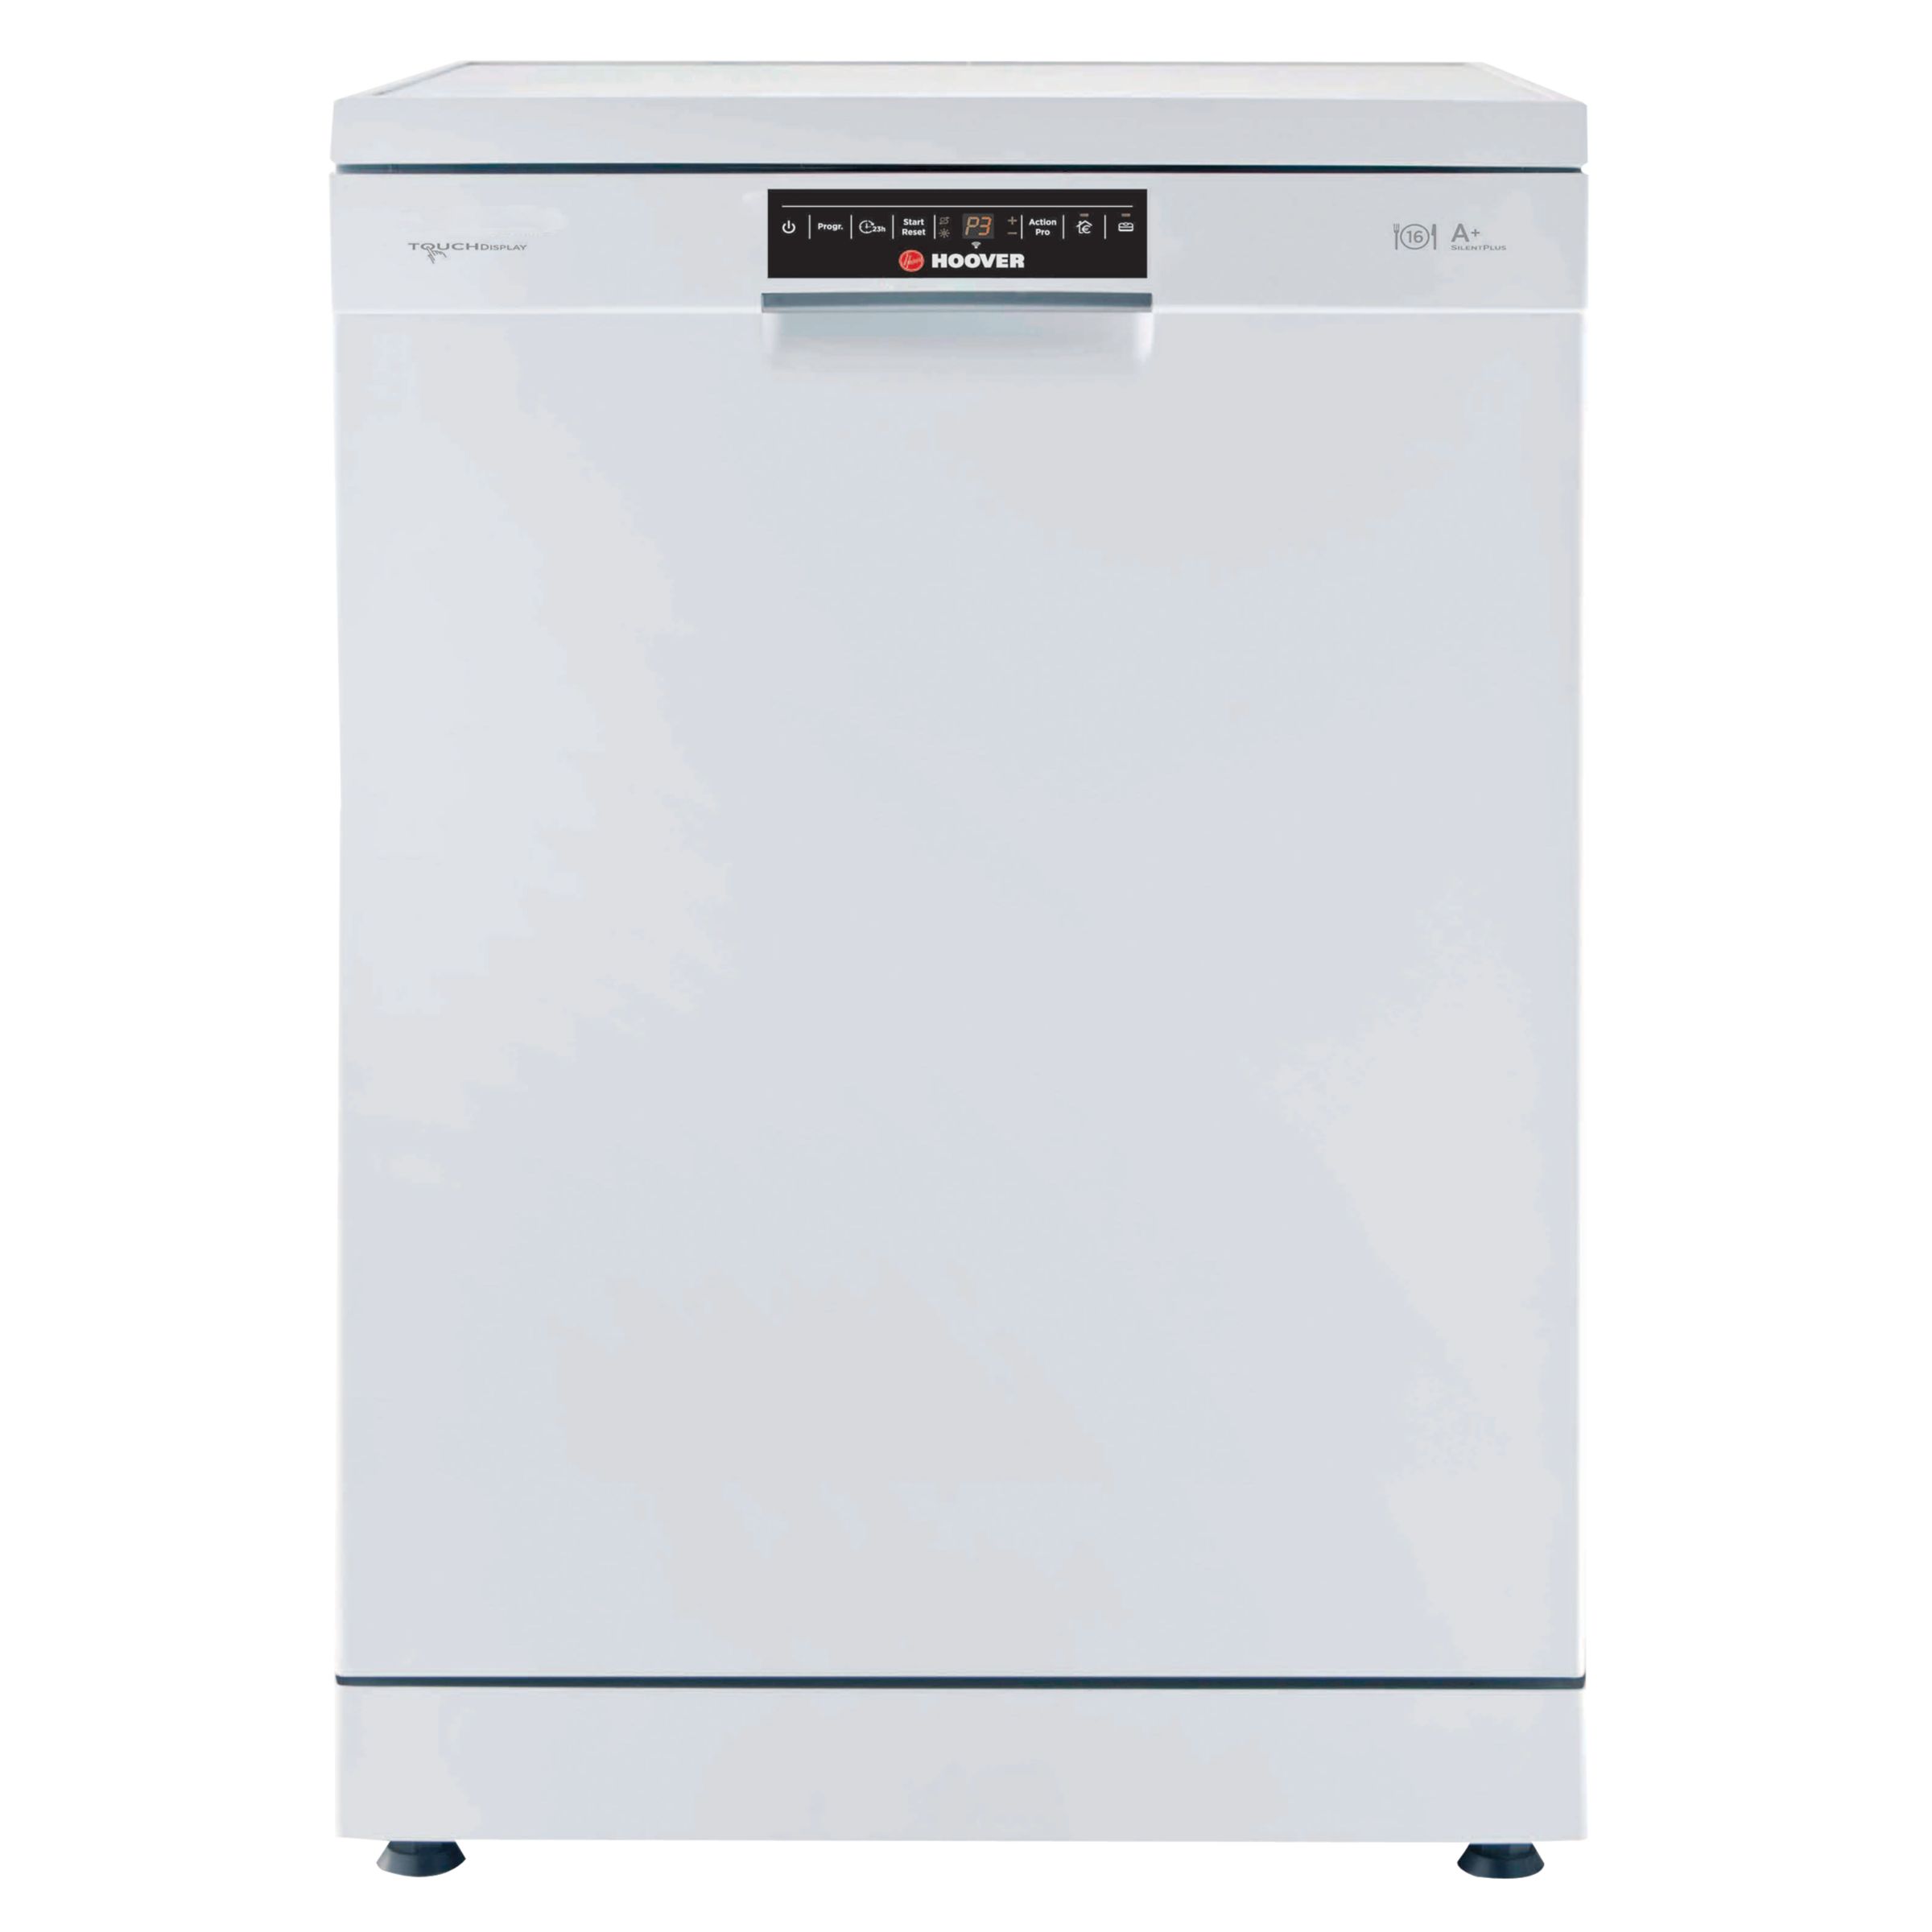 Hoover DYM886TPW Freestanding Dishwasher in White